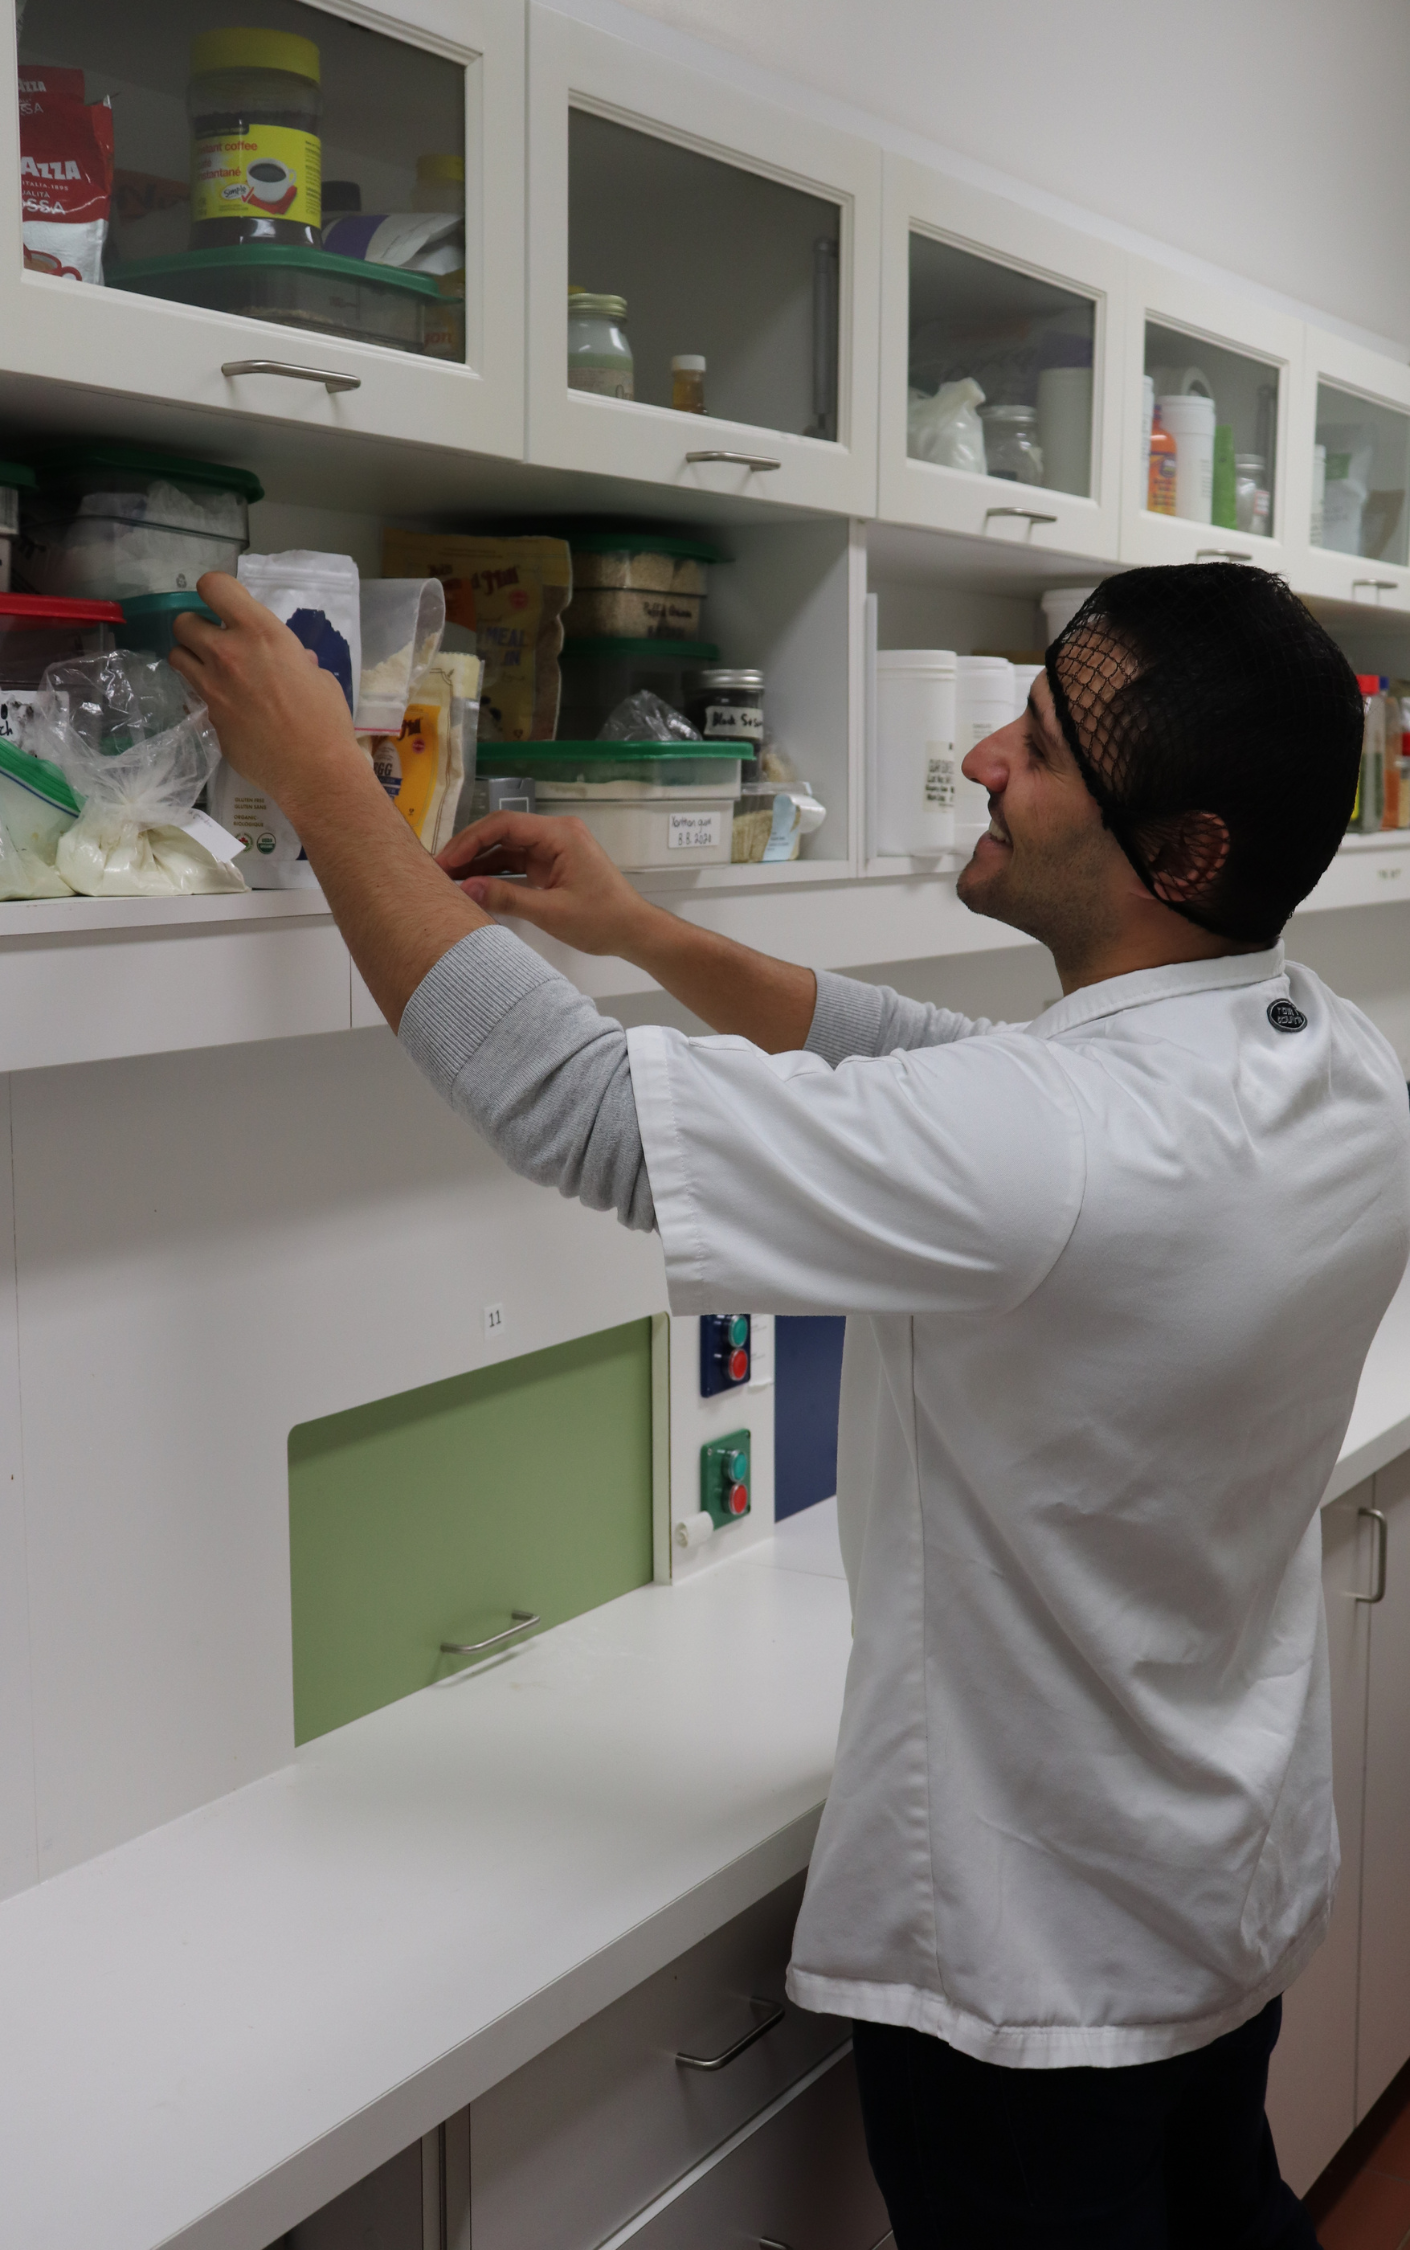 Student retrieving ingredients from a cupboard.